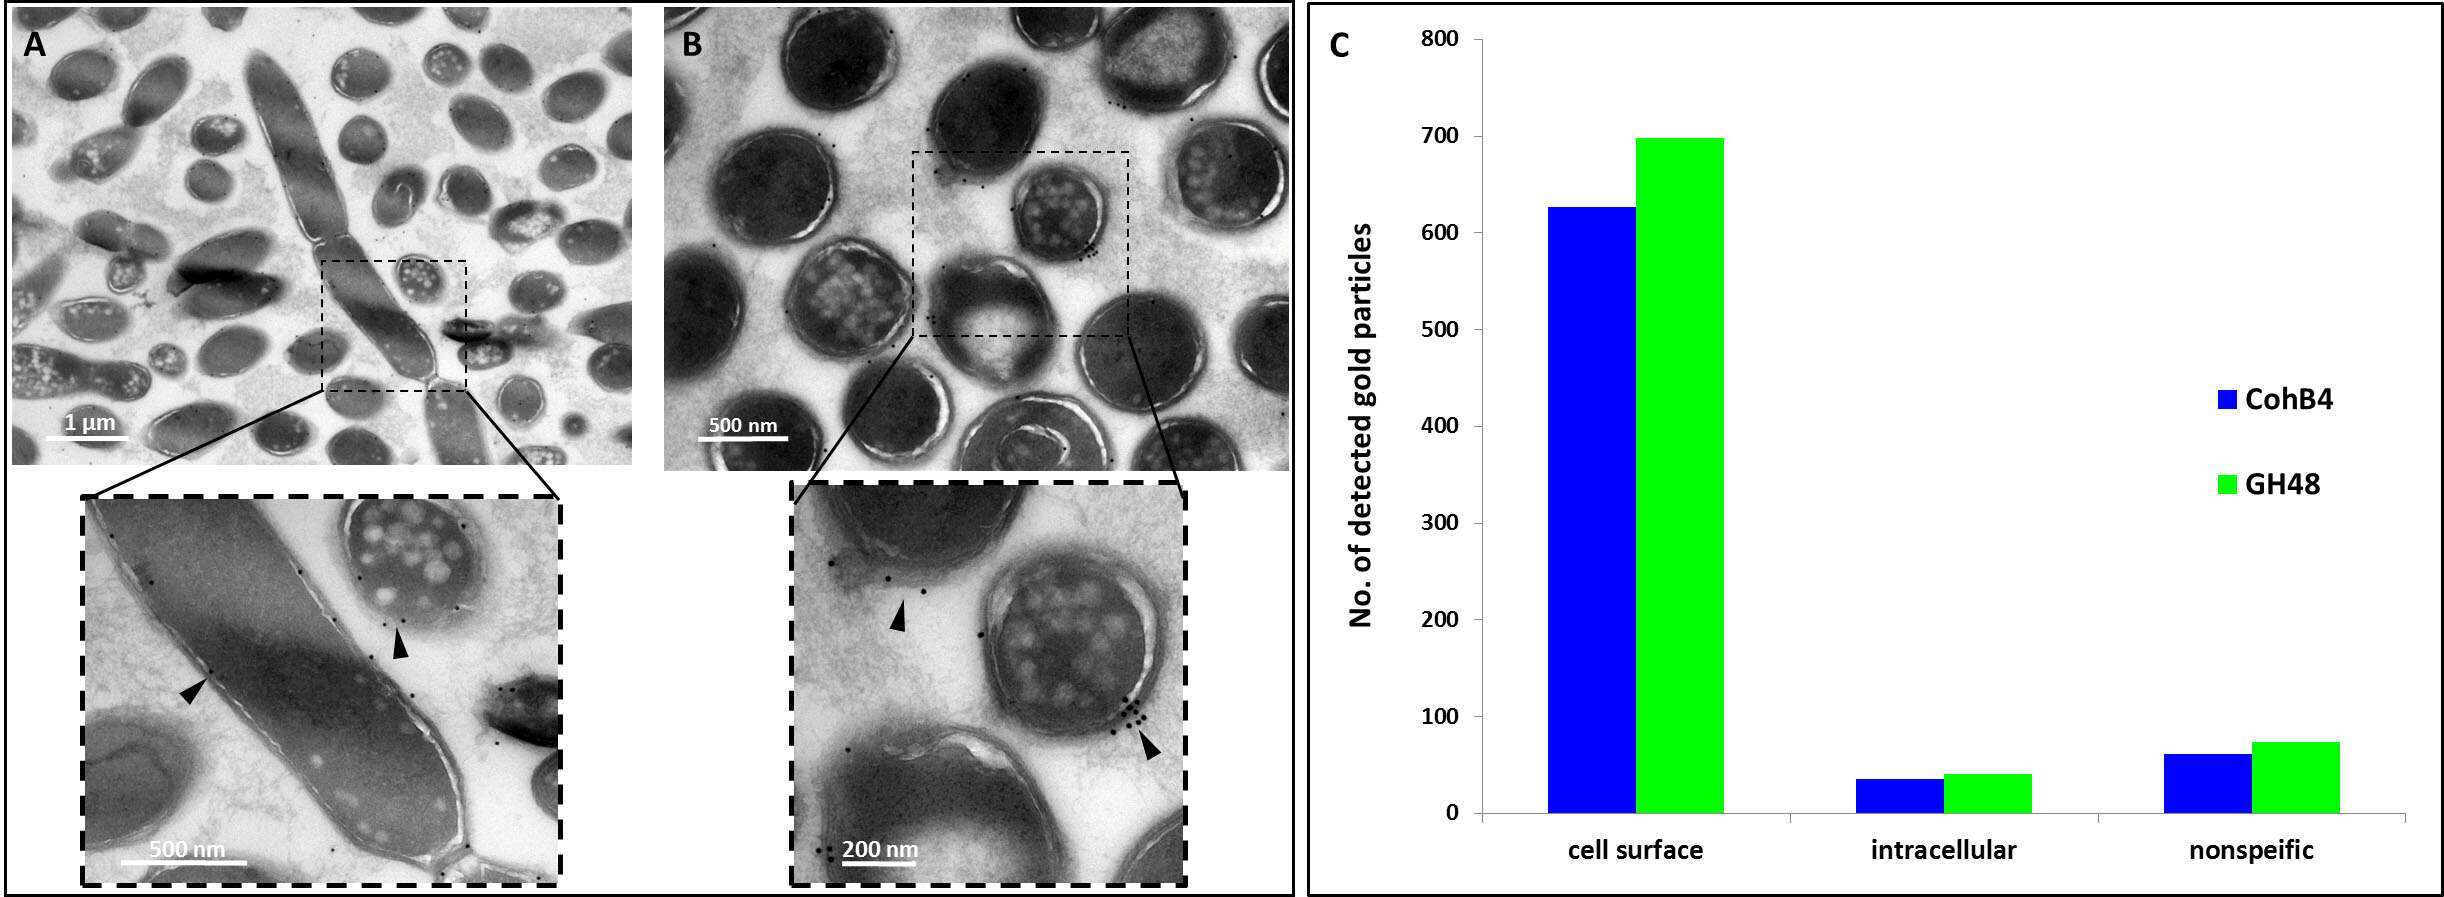 Figure 2: TEM immunolabeling of C. clariflavum. Cells were immunolabeled (arrows) with gold-derivatized anti-CohB4 (A) or anti-GH48 (B). (C) Cellulosome particles are exclusively localized to the cell surface (cells labeled by anti-CohB4 n=217 and by anti-GH48 n=269).